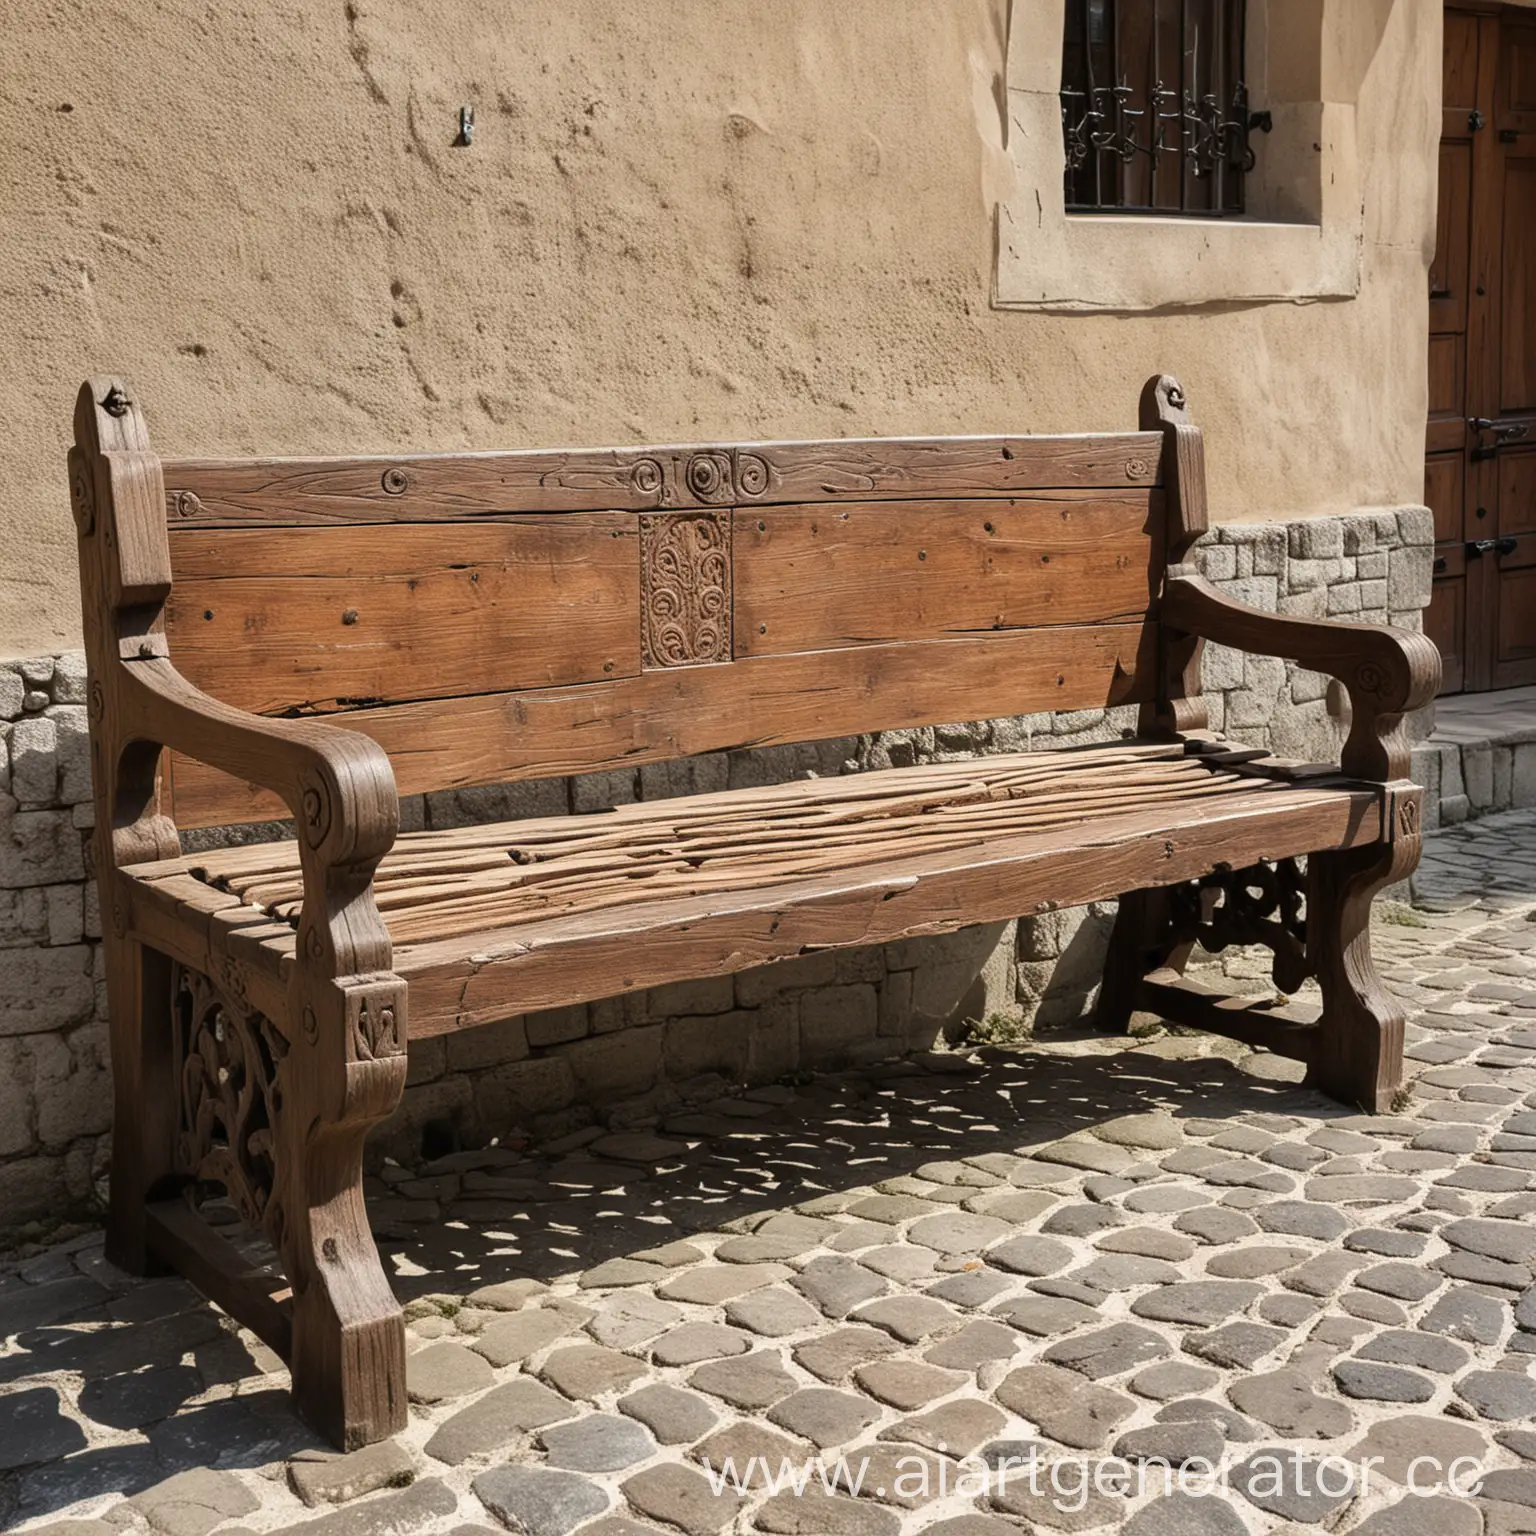 a bench from the Middle Ages